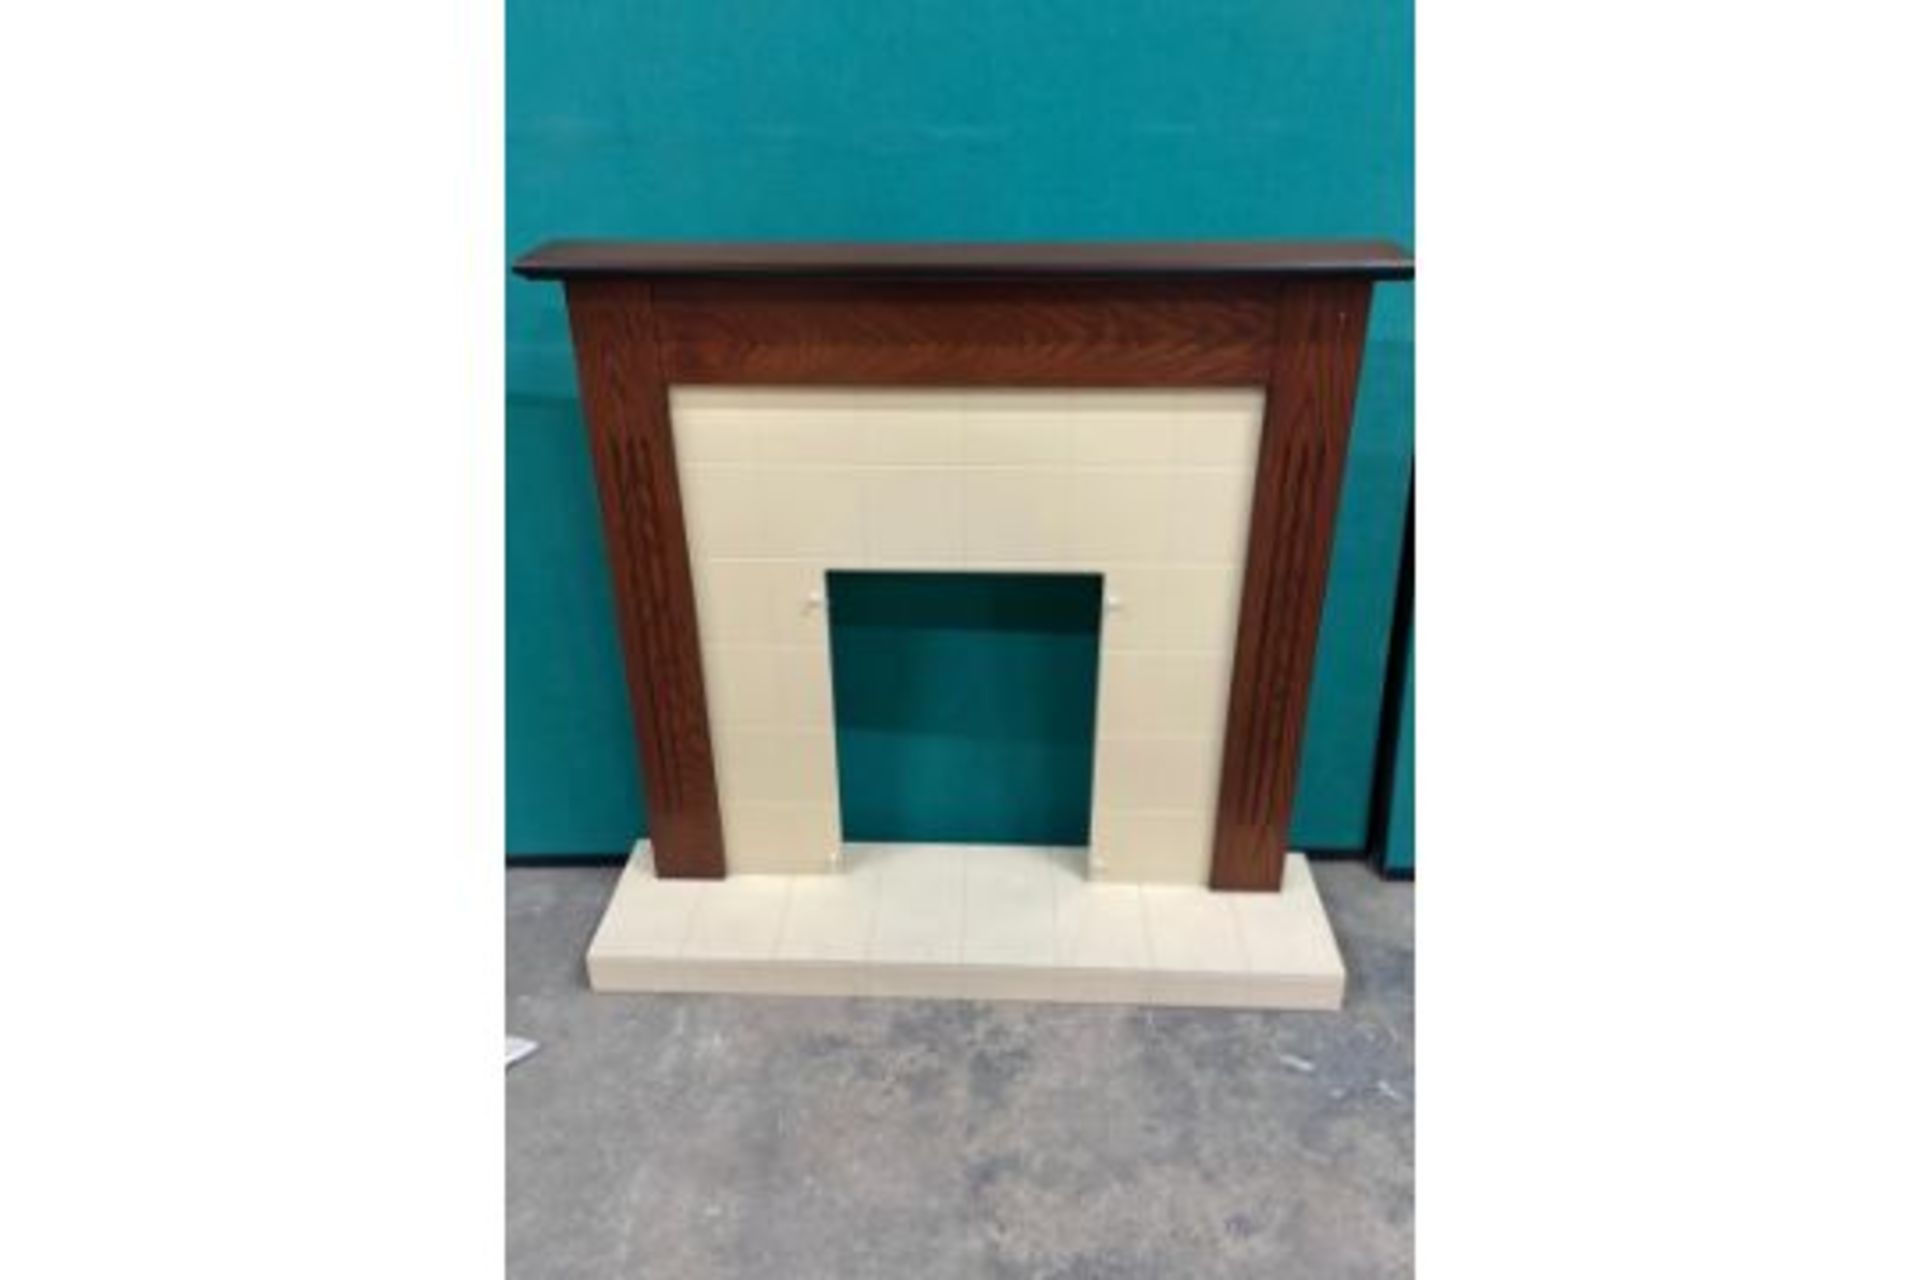 WOODEN FIRE SURROUND DISPLAY WITH TILE DETAIL